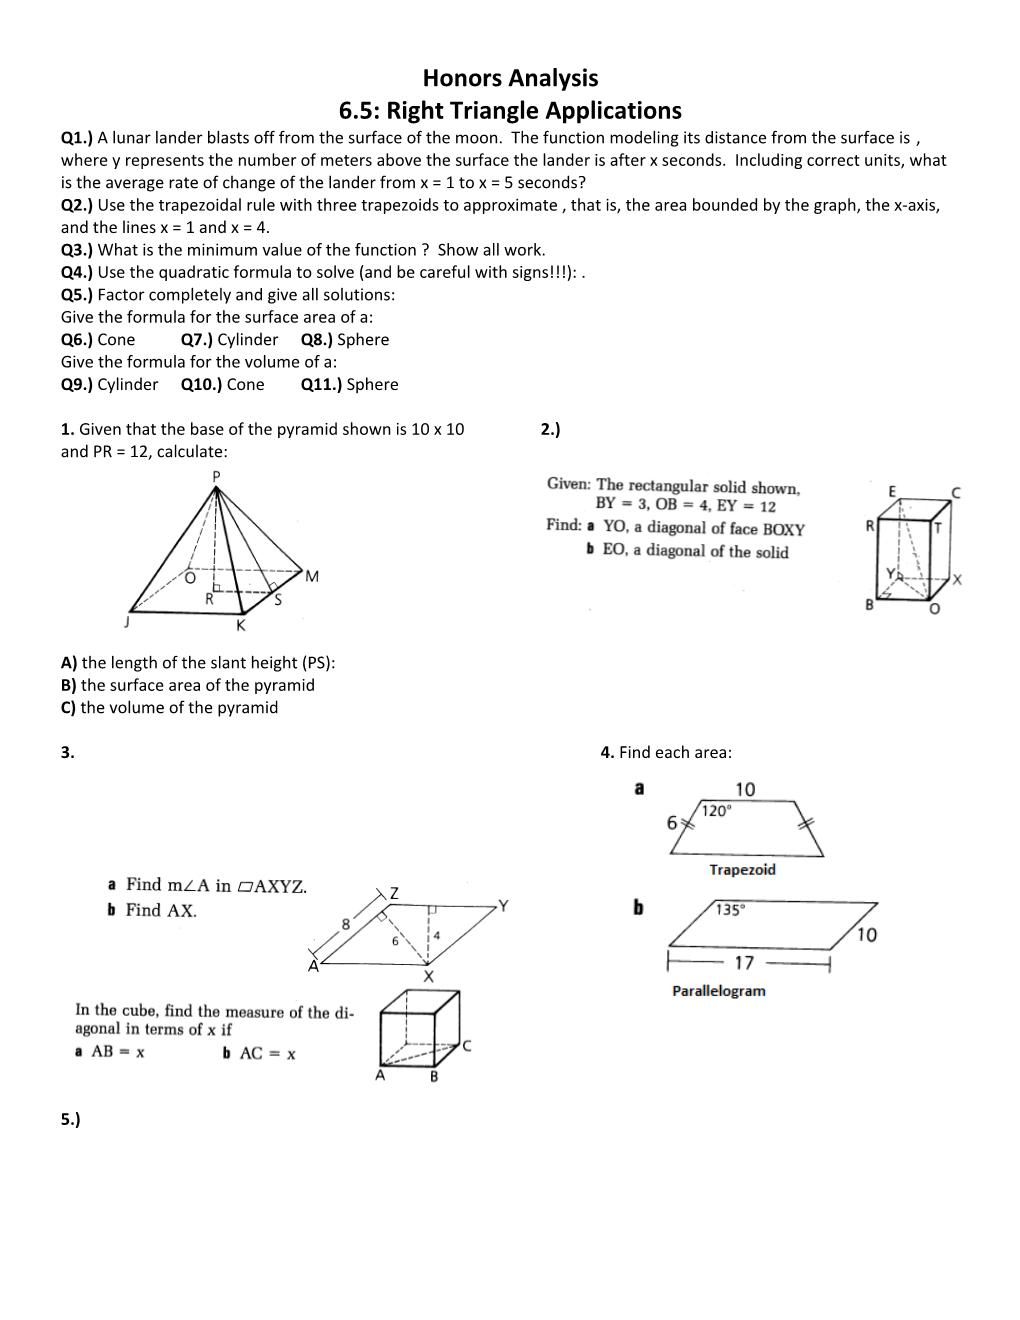 6.5: Right Triangle Applications